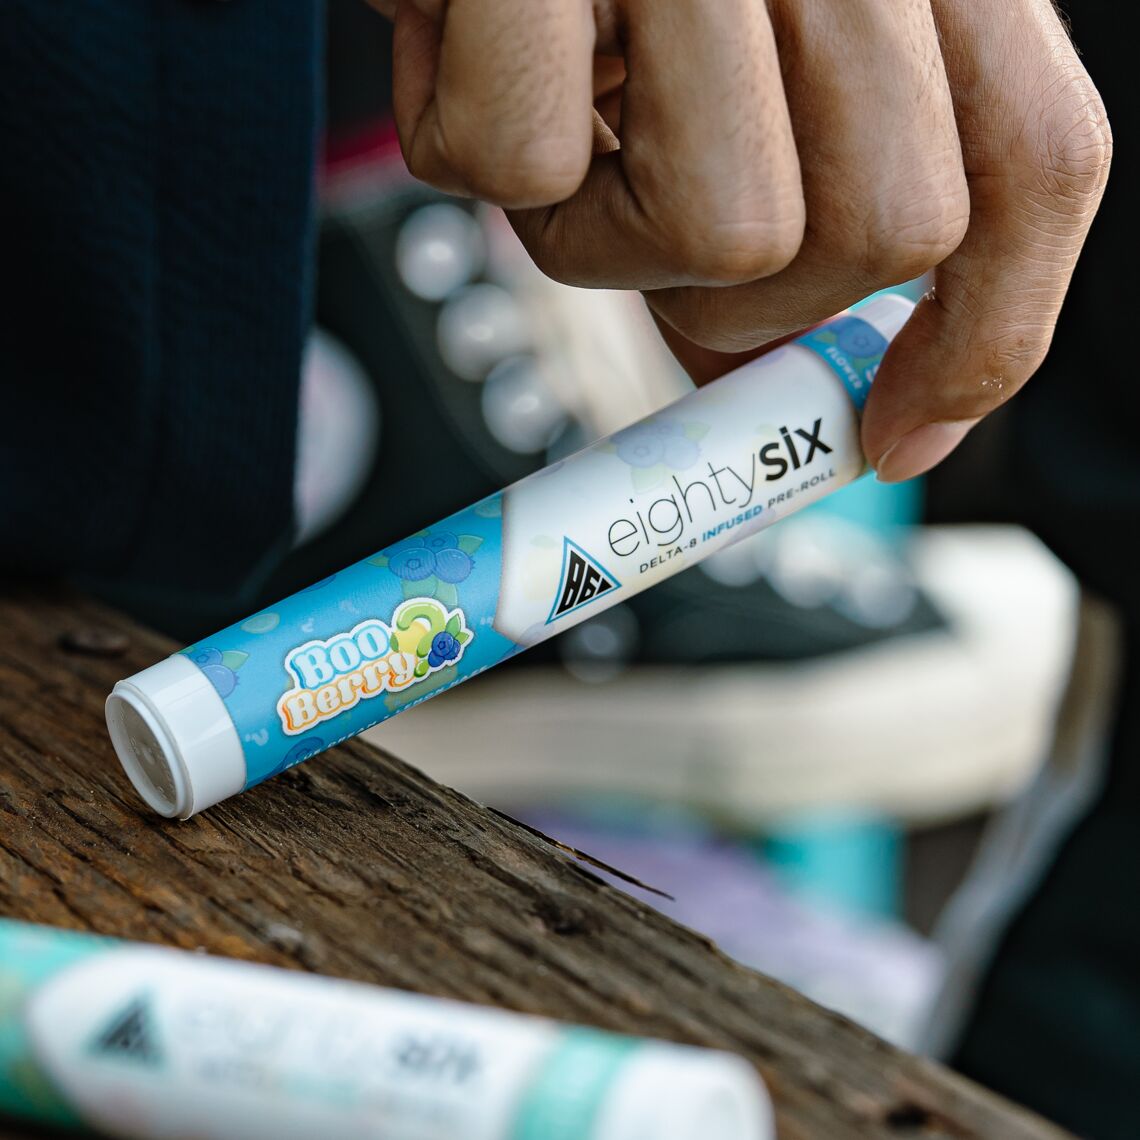 Delta 8 pre-rolls from eighty six cover photo